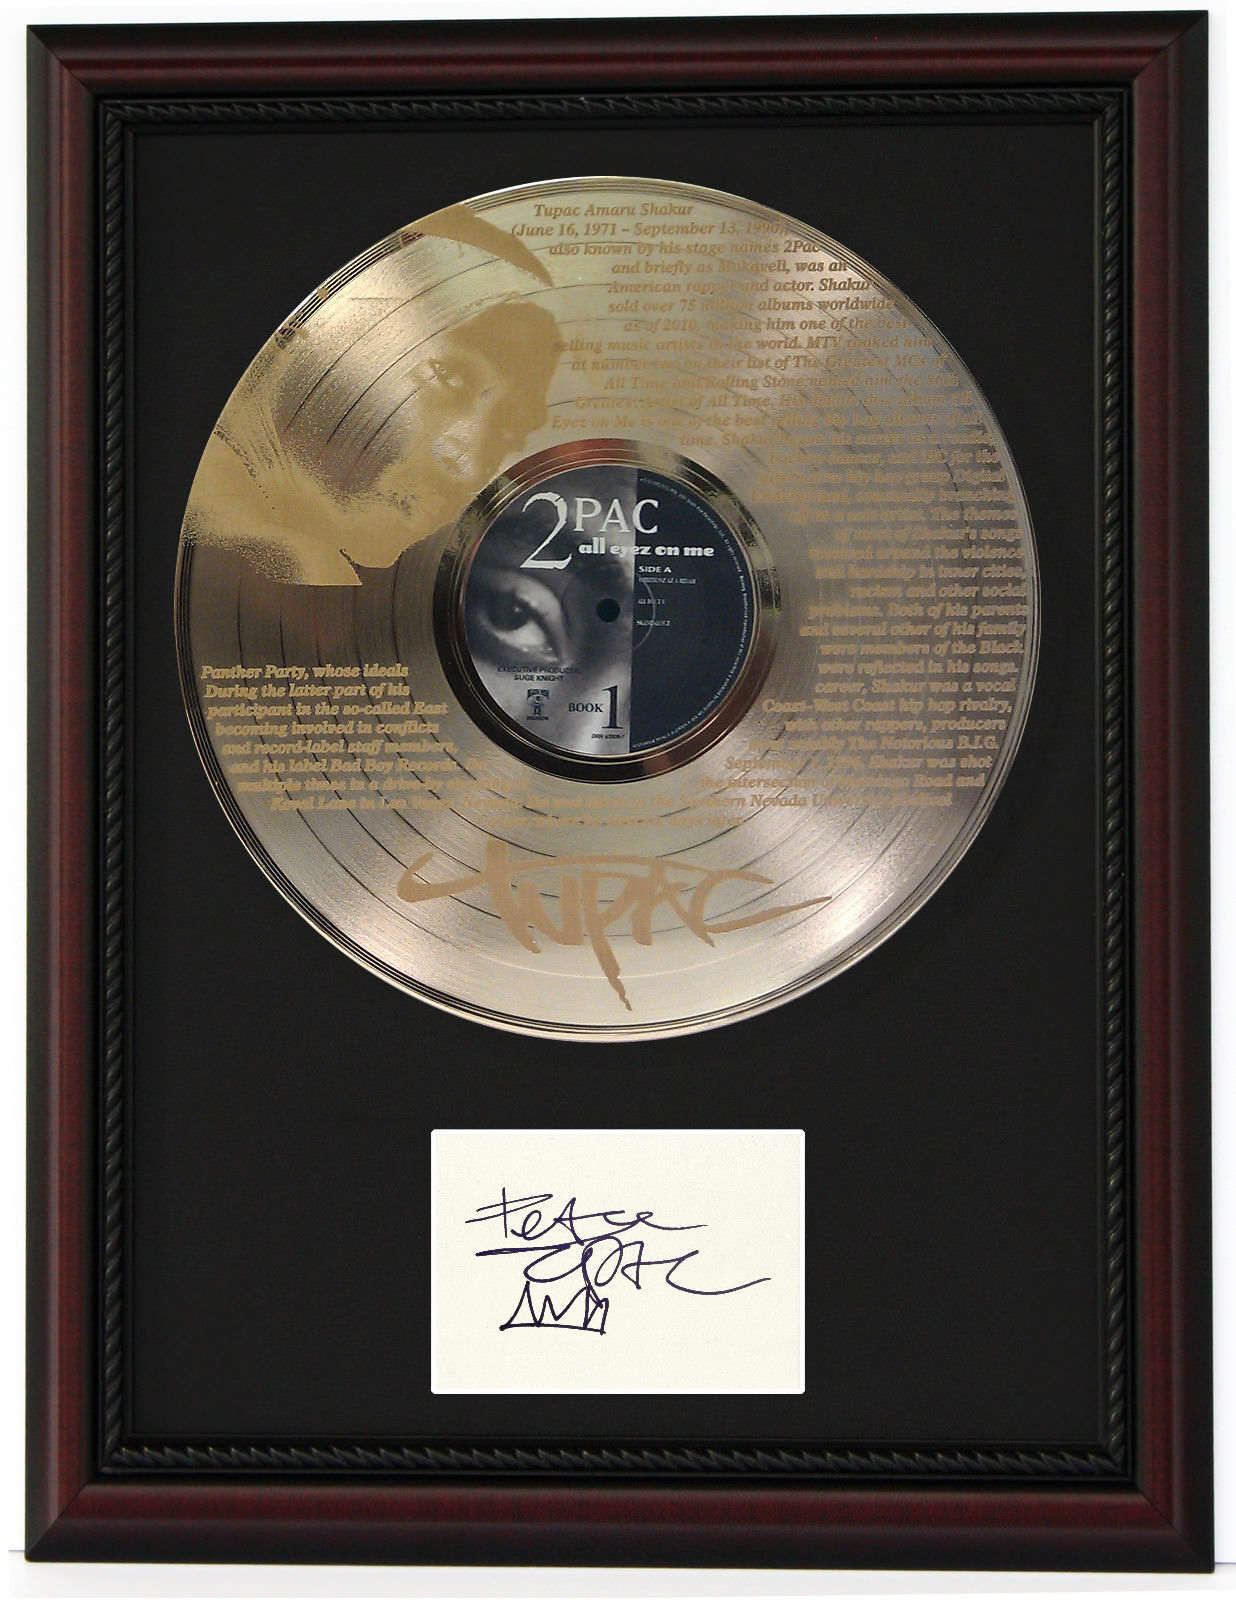 Shakur Biography Framed Etched Gold LP Record Display 2Pac C3 - Gold Record Outlet Album and Disc Collectible Memorabilia